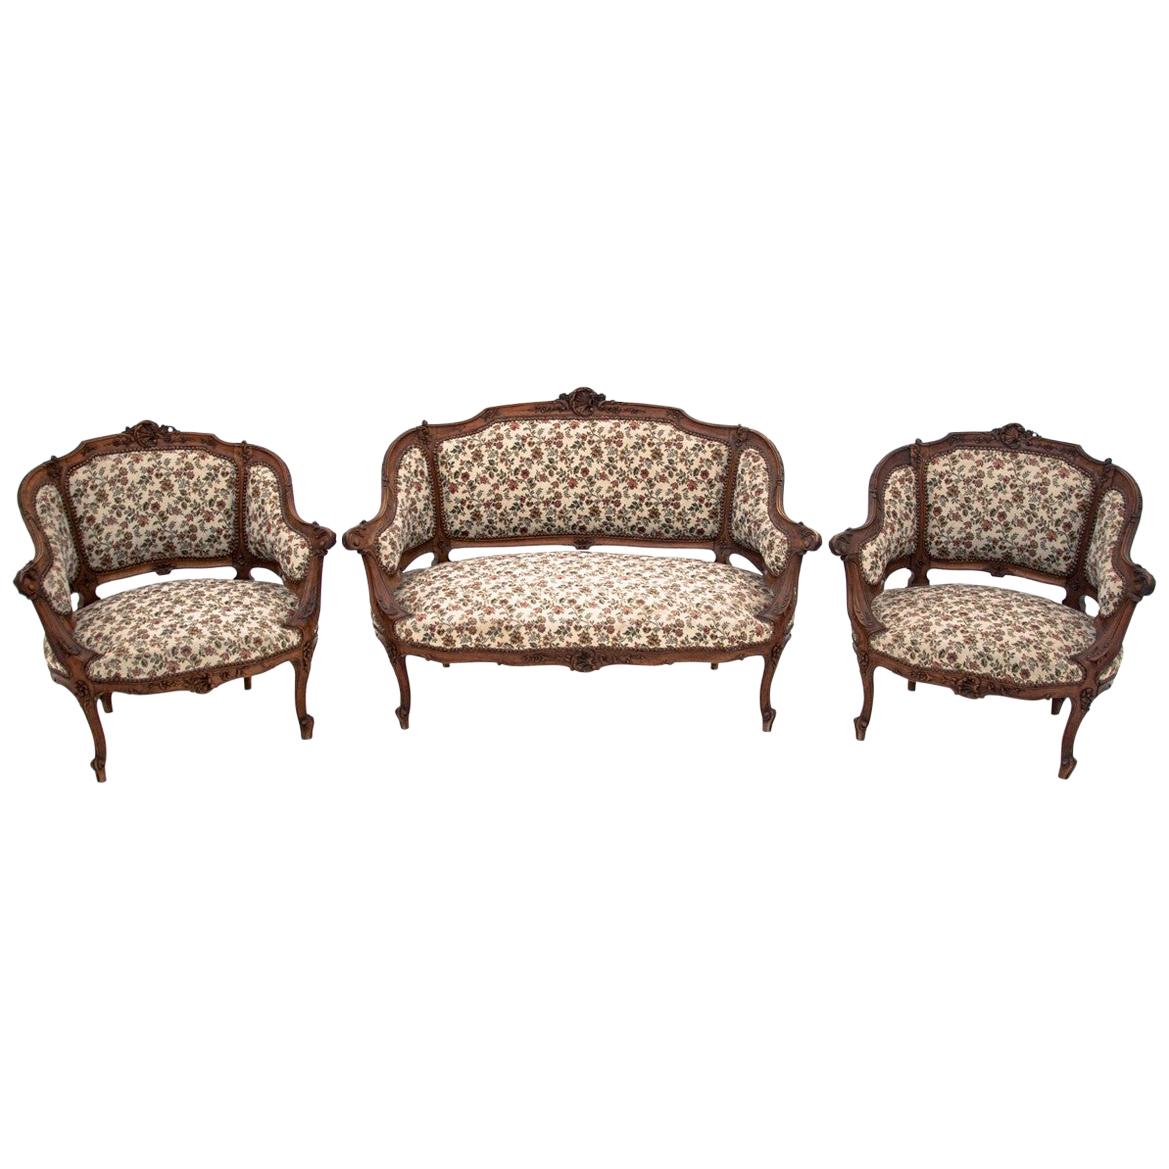 Antique French Salon Set in the Louis Philippe Style